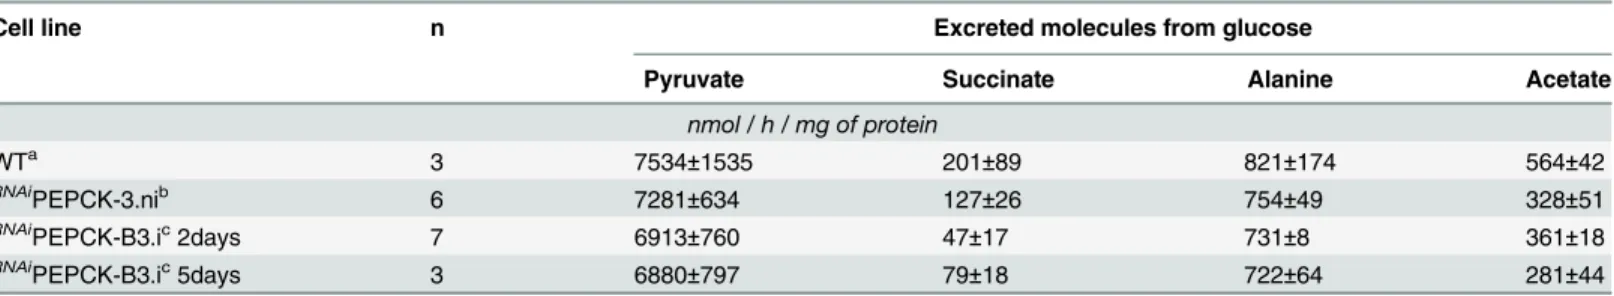 Table 1. Production of succinate, pyruvate, alanine and acetate from glucose in PEPCK RNAi T 